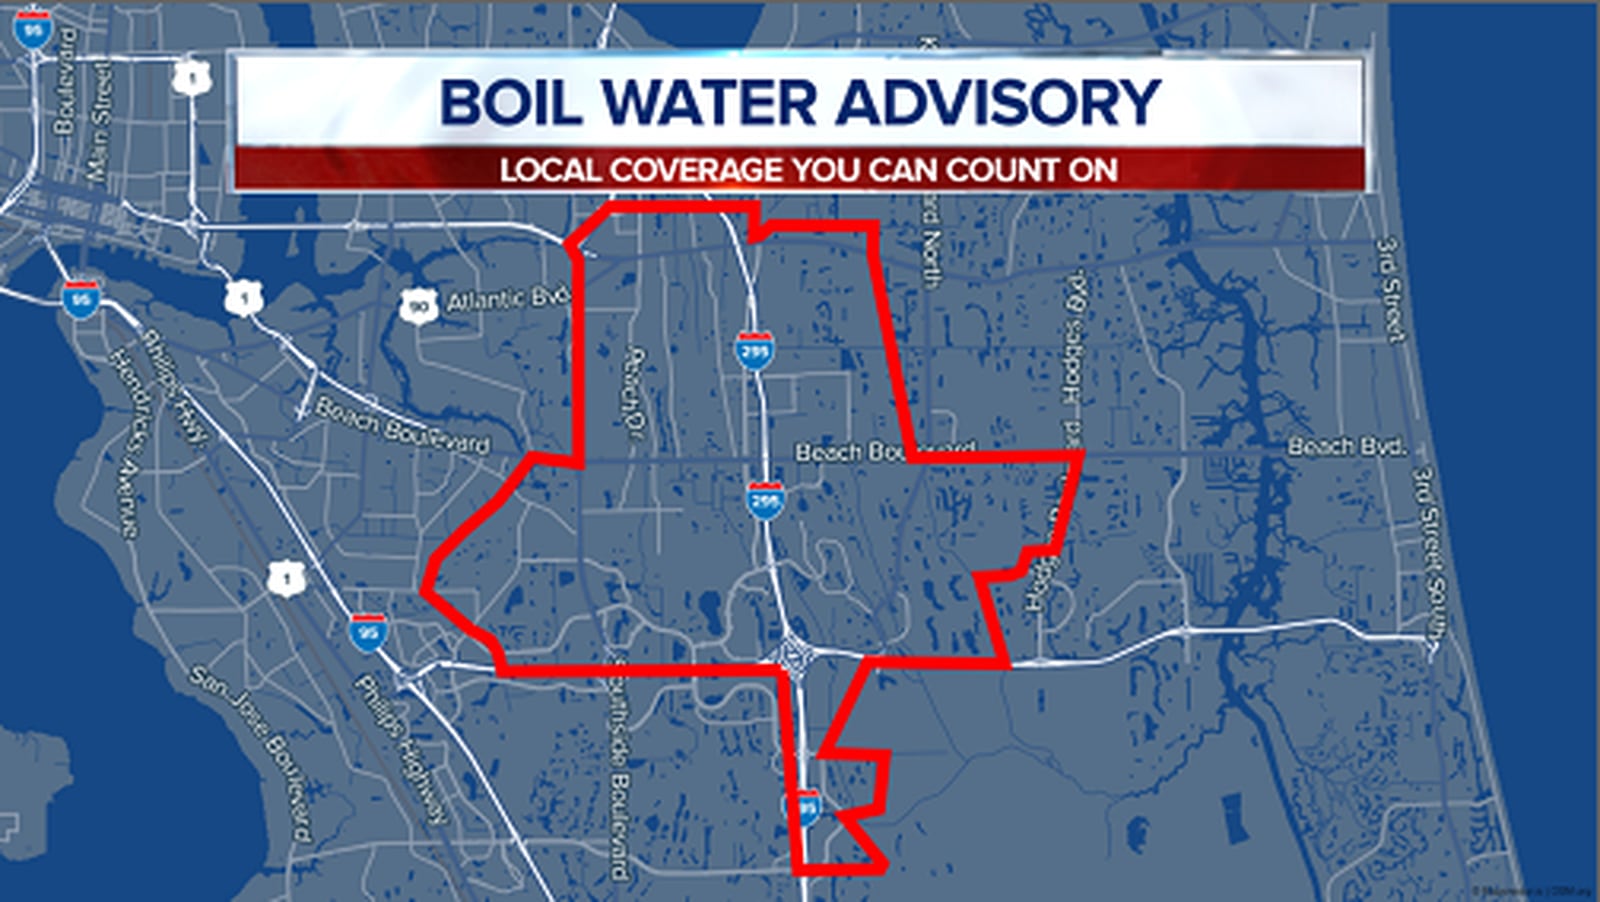 Boil water advisory issued for the Sandalwood, Town Center, Tinseltown